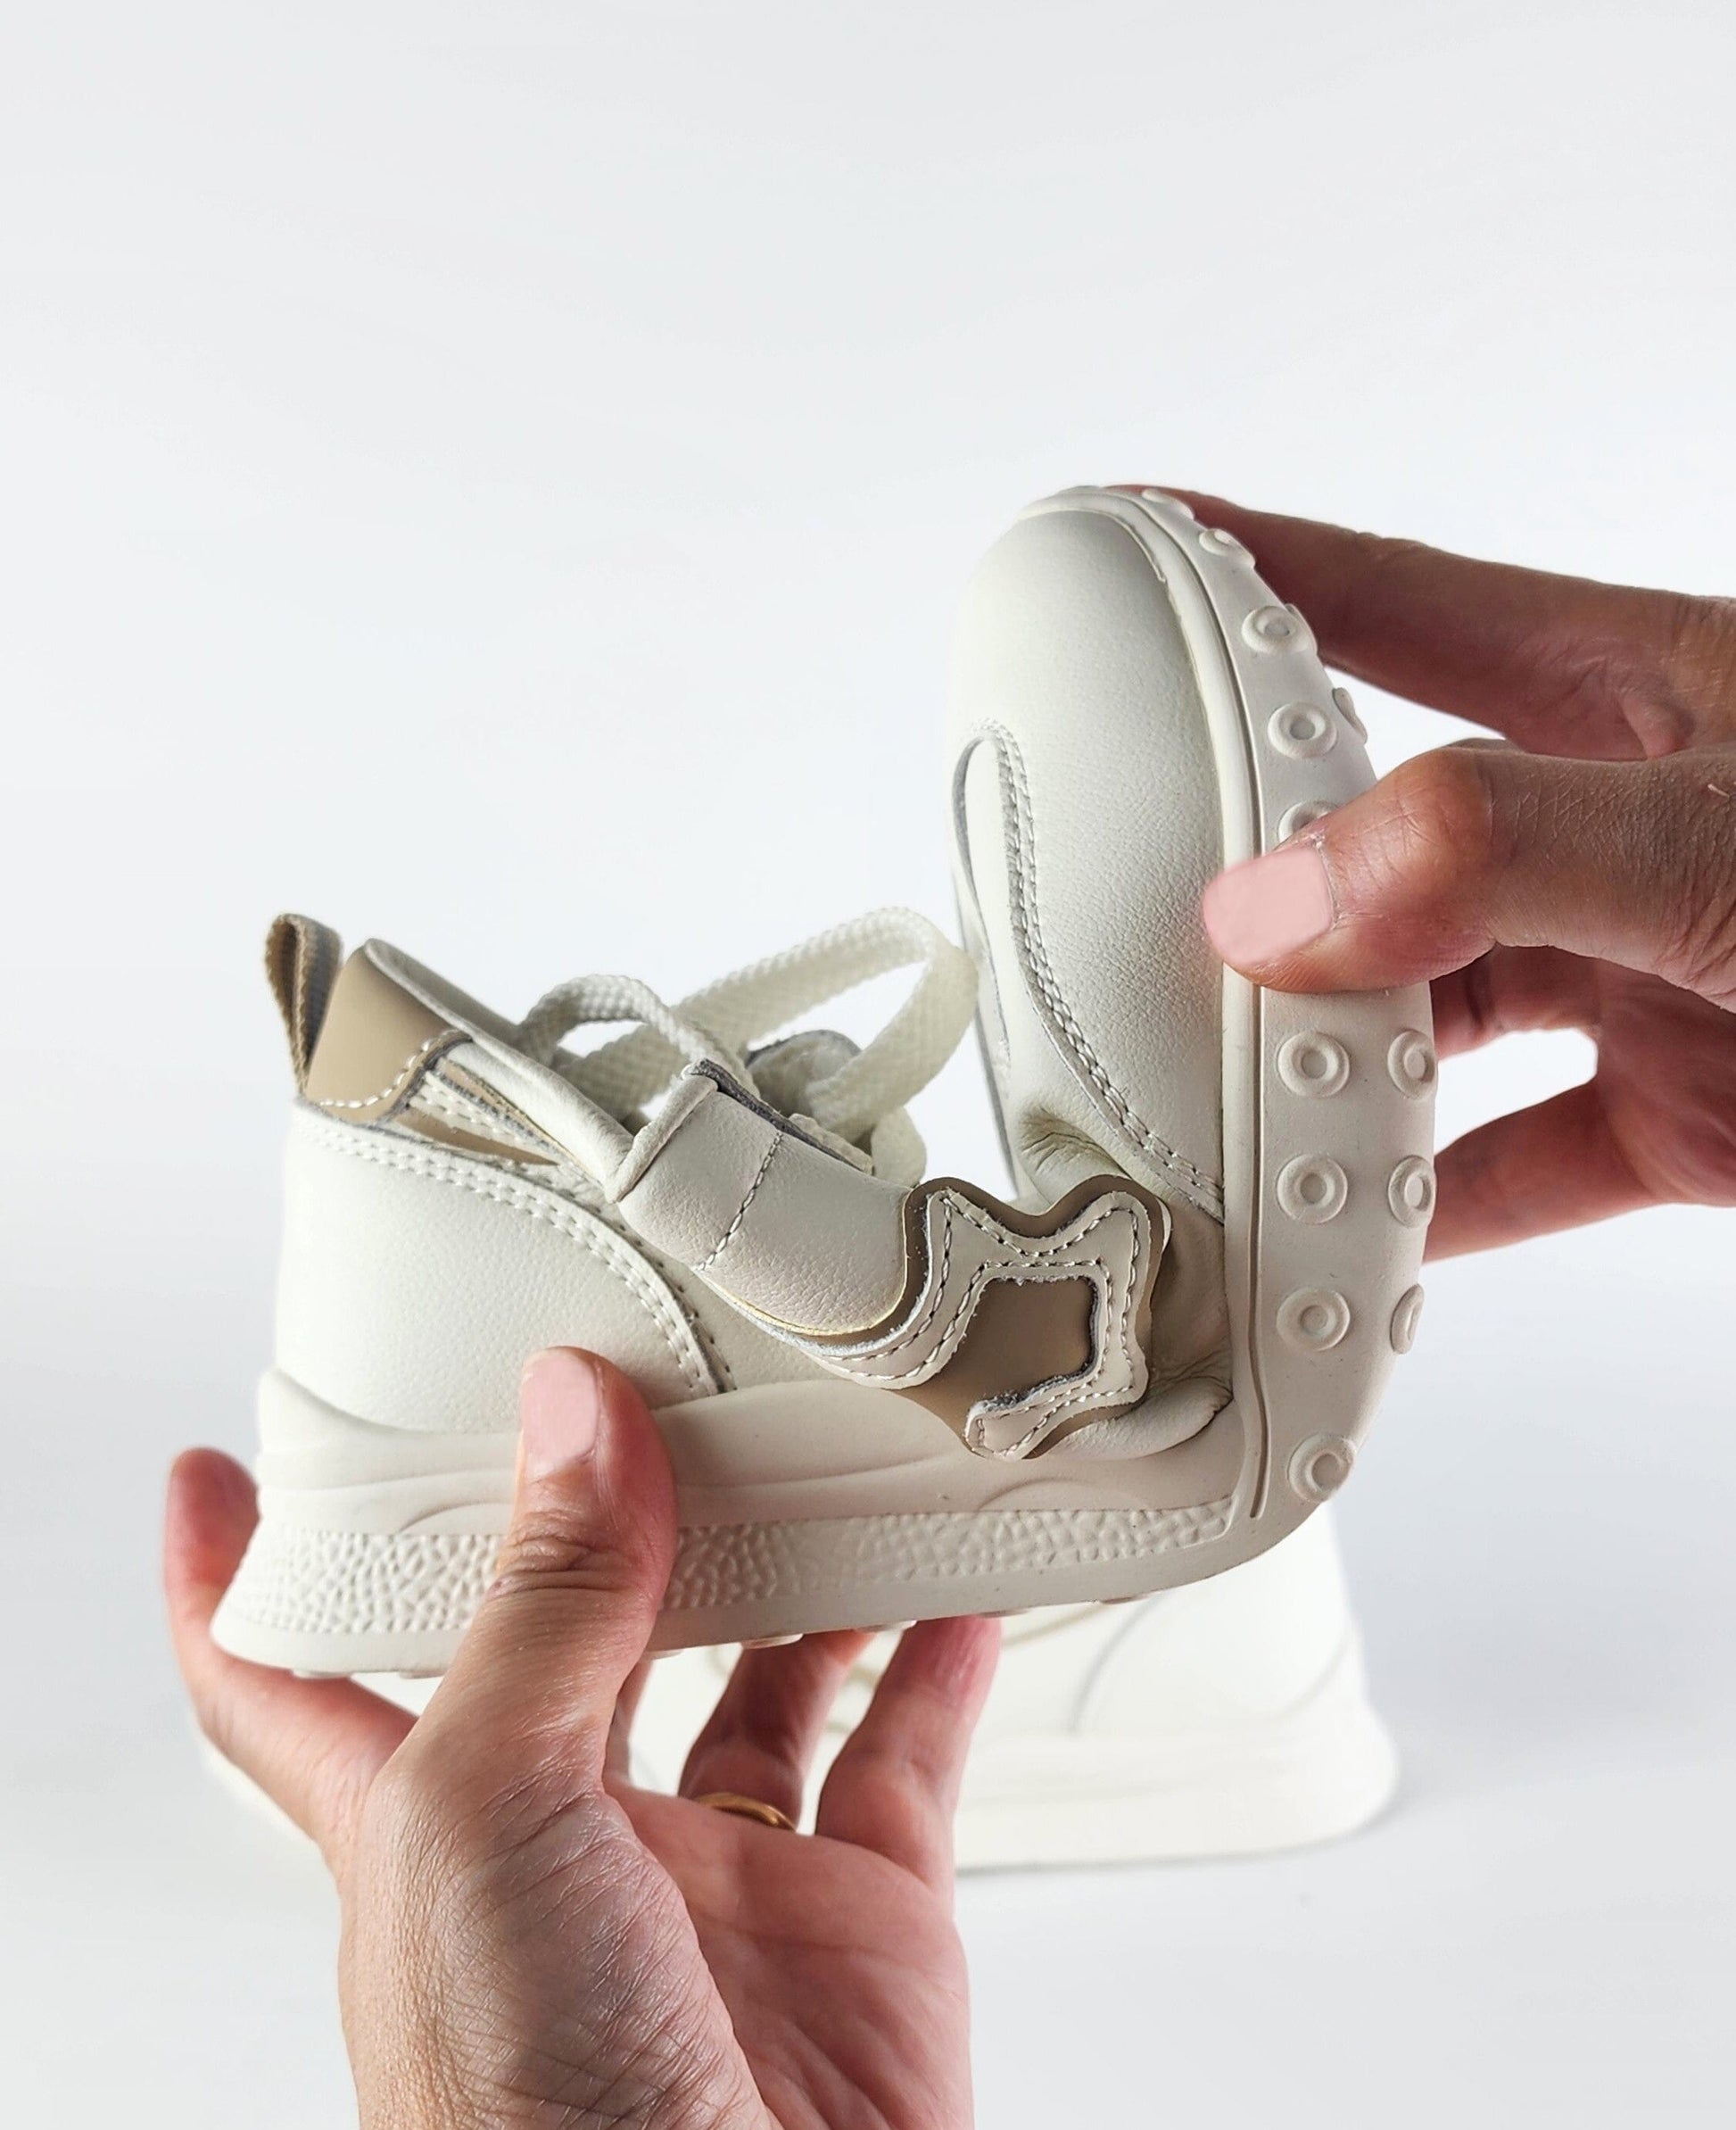 SS23009 White leather sneakers with star and flexible sole sneakers Sam Star Shoes Tan 37 